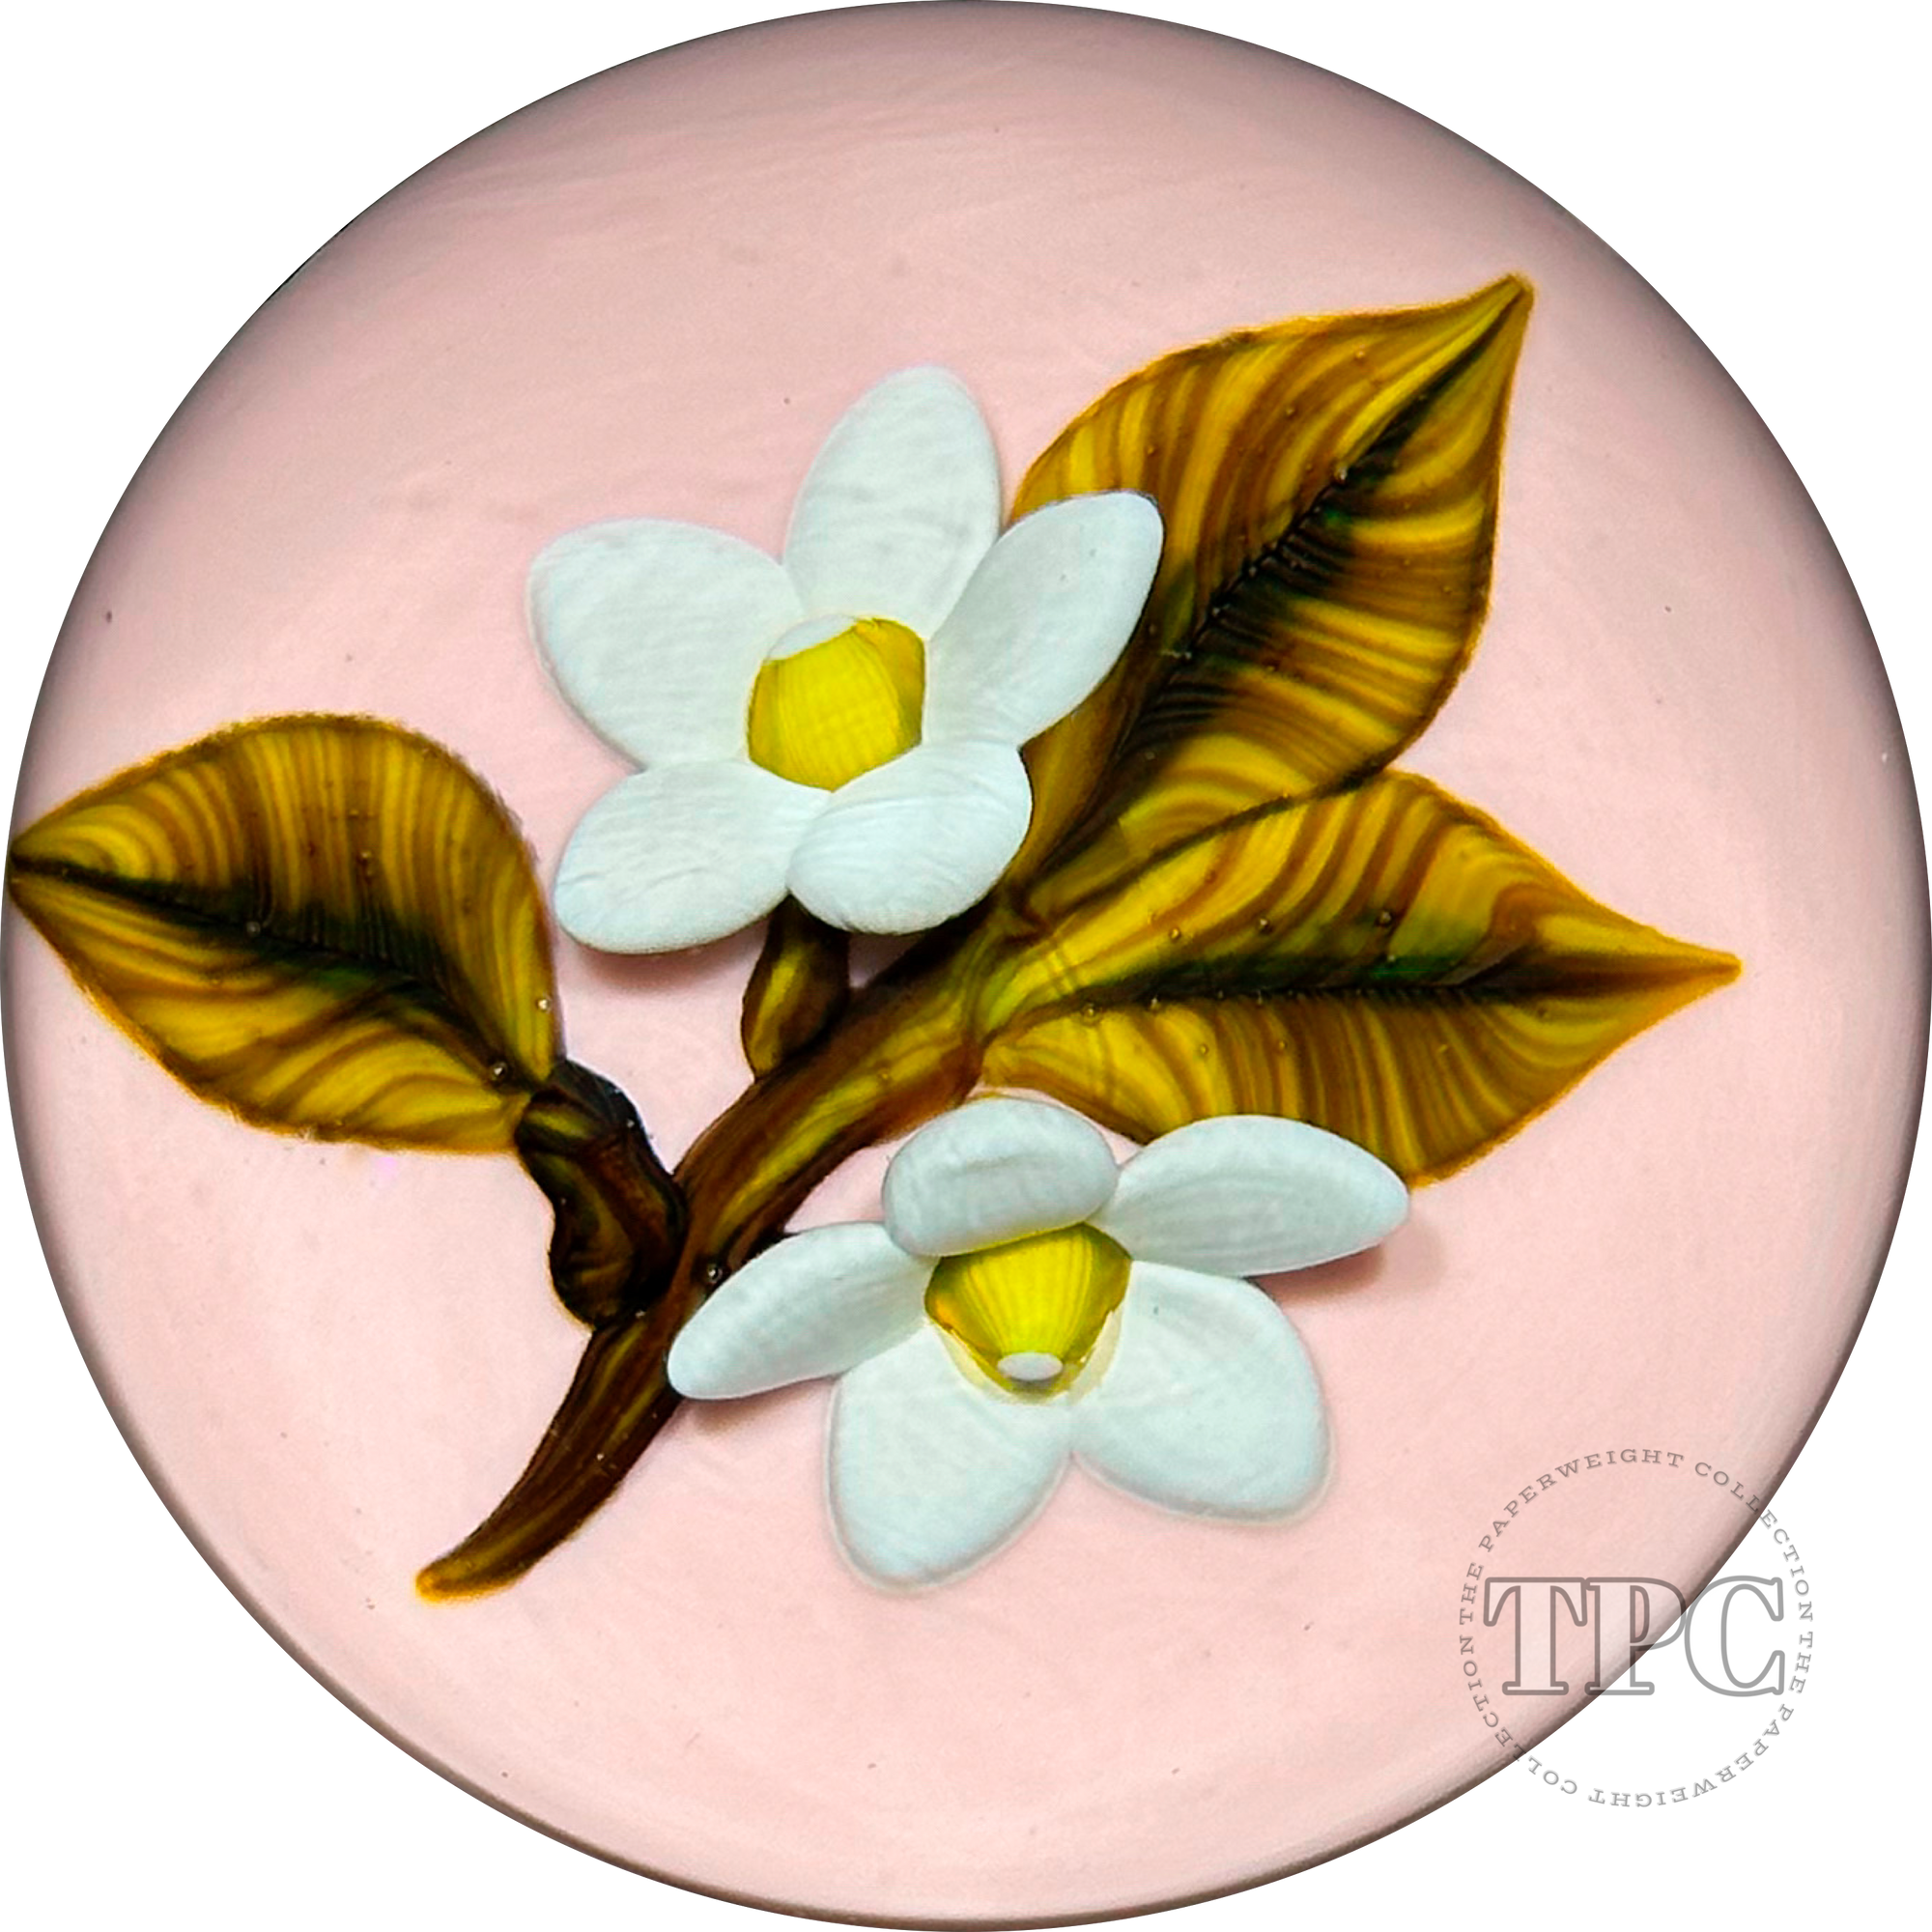 William Manson 2022 Art Glass Paperweight Flamework White Daisies on Opaque Pink Ground LE 1/5